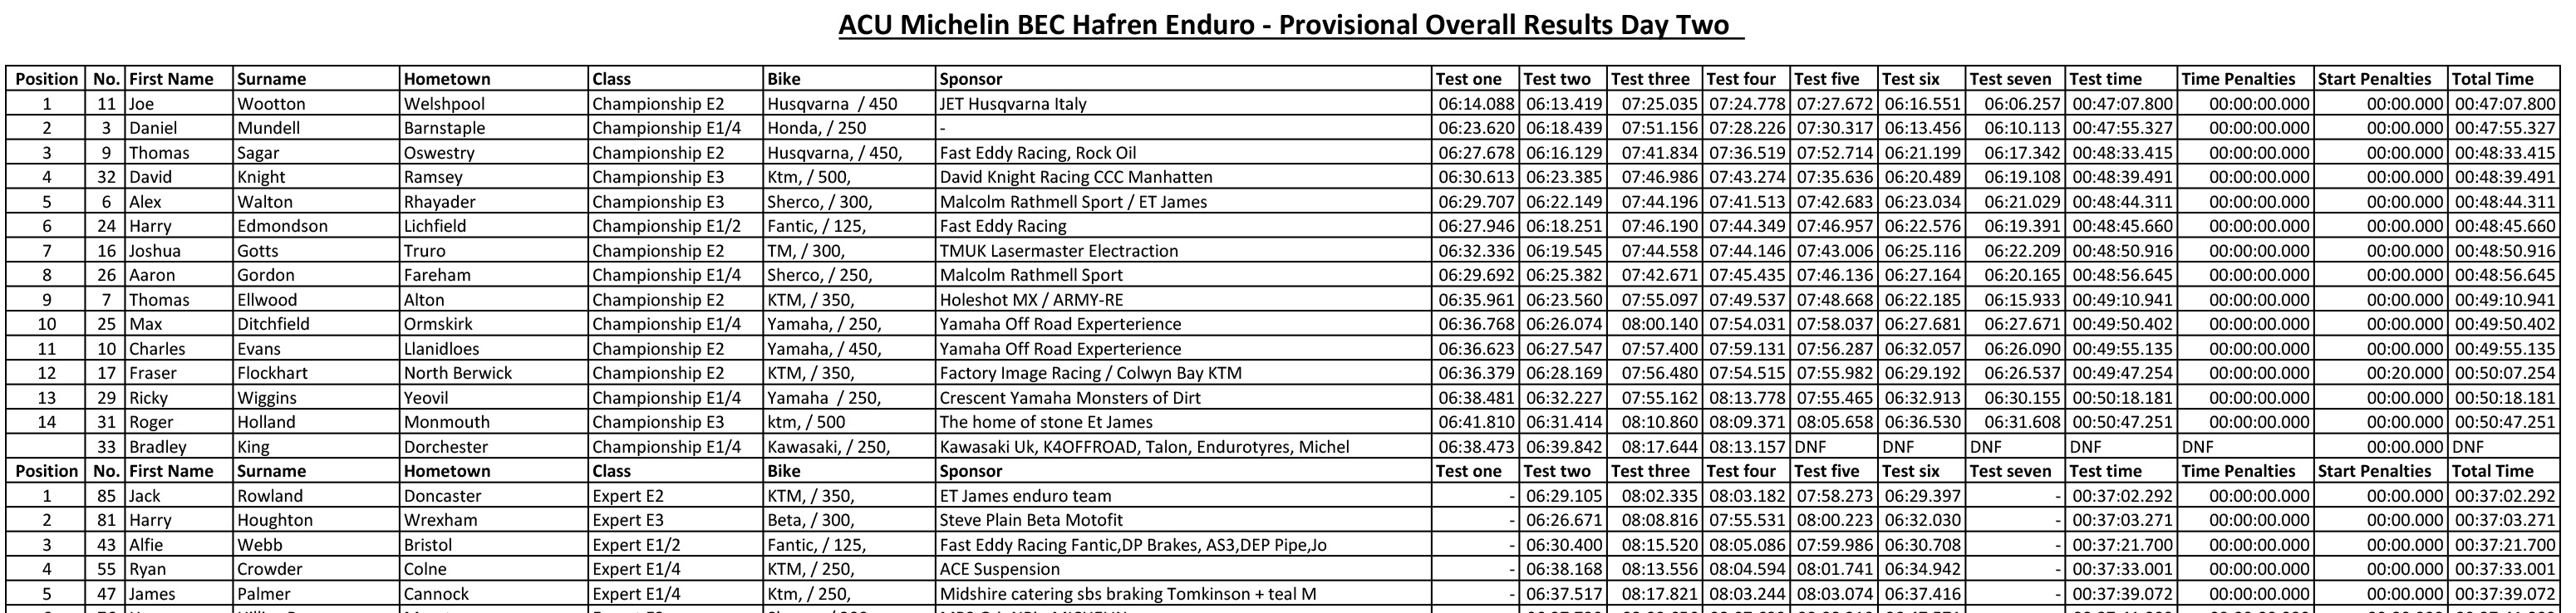 acu-michelin-bec-rounds-34-hafren-enduro_results-day-2_champion_p88993